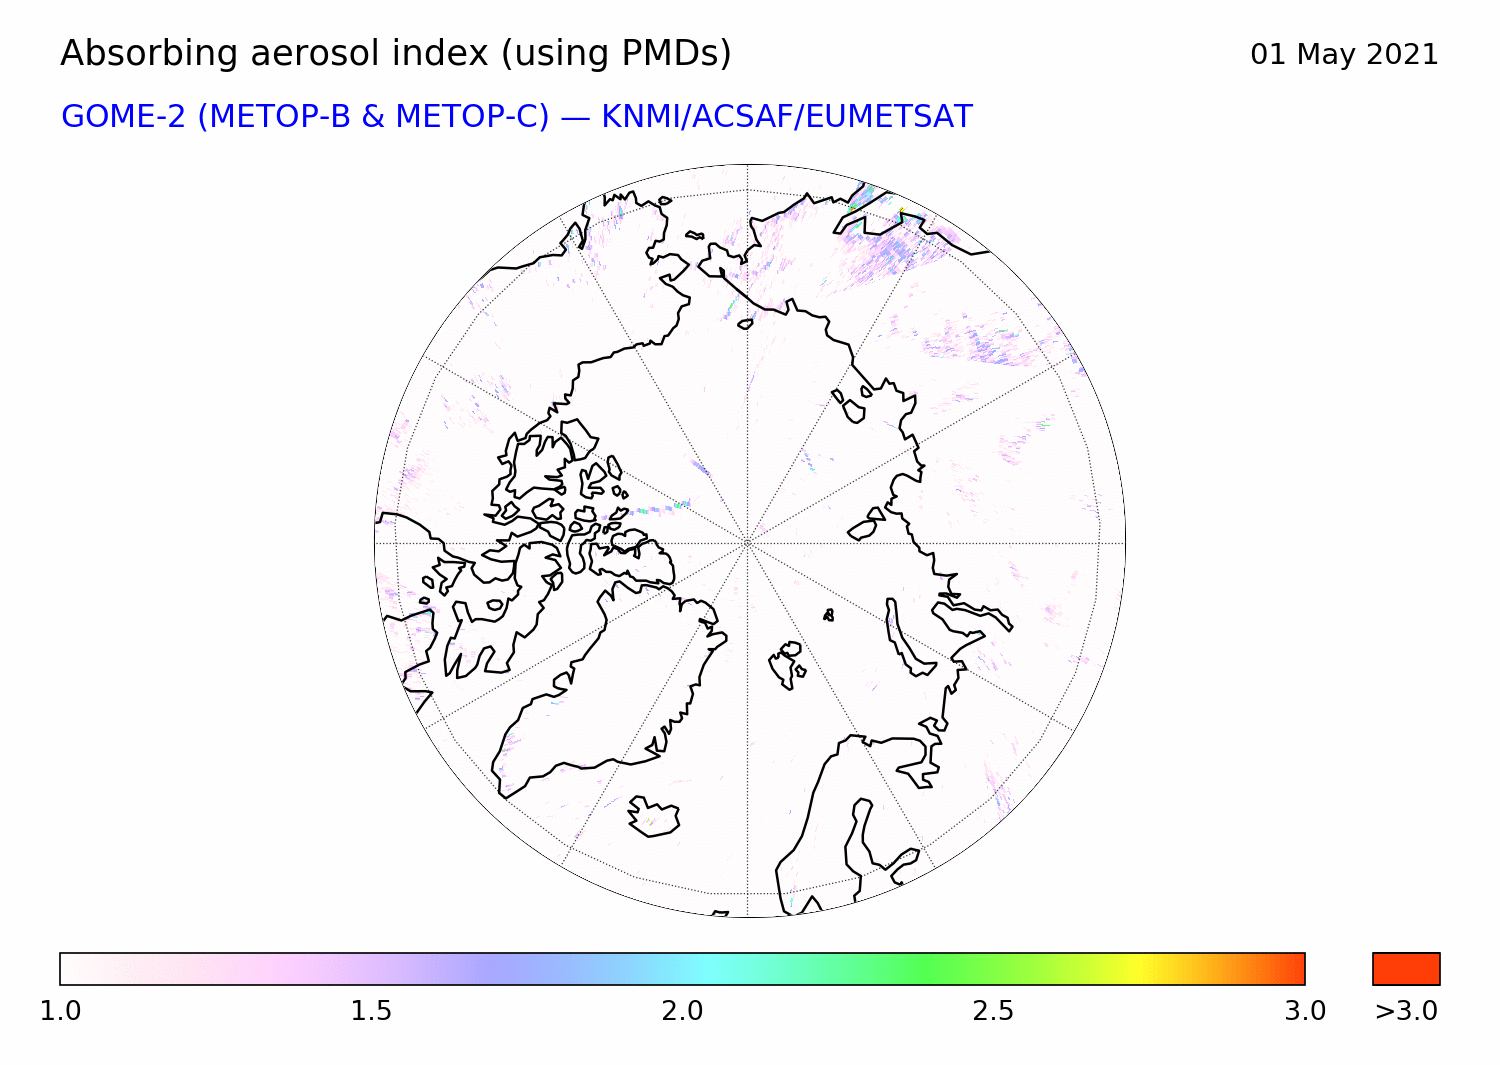 GOME-2 - Absorbing aerosol index of 01 May 2021